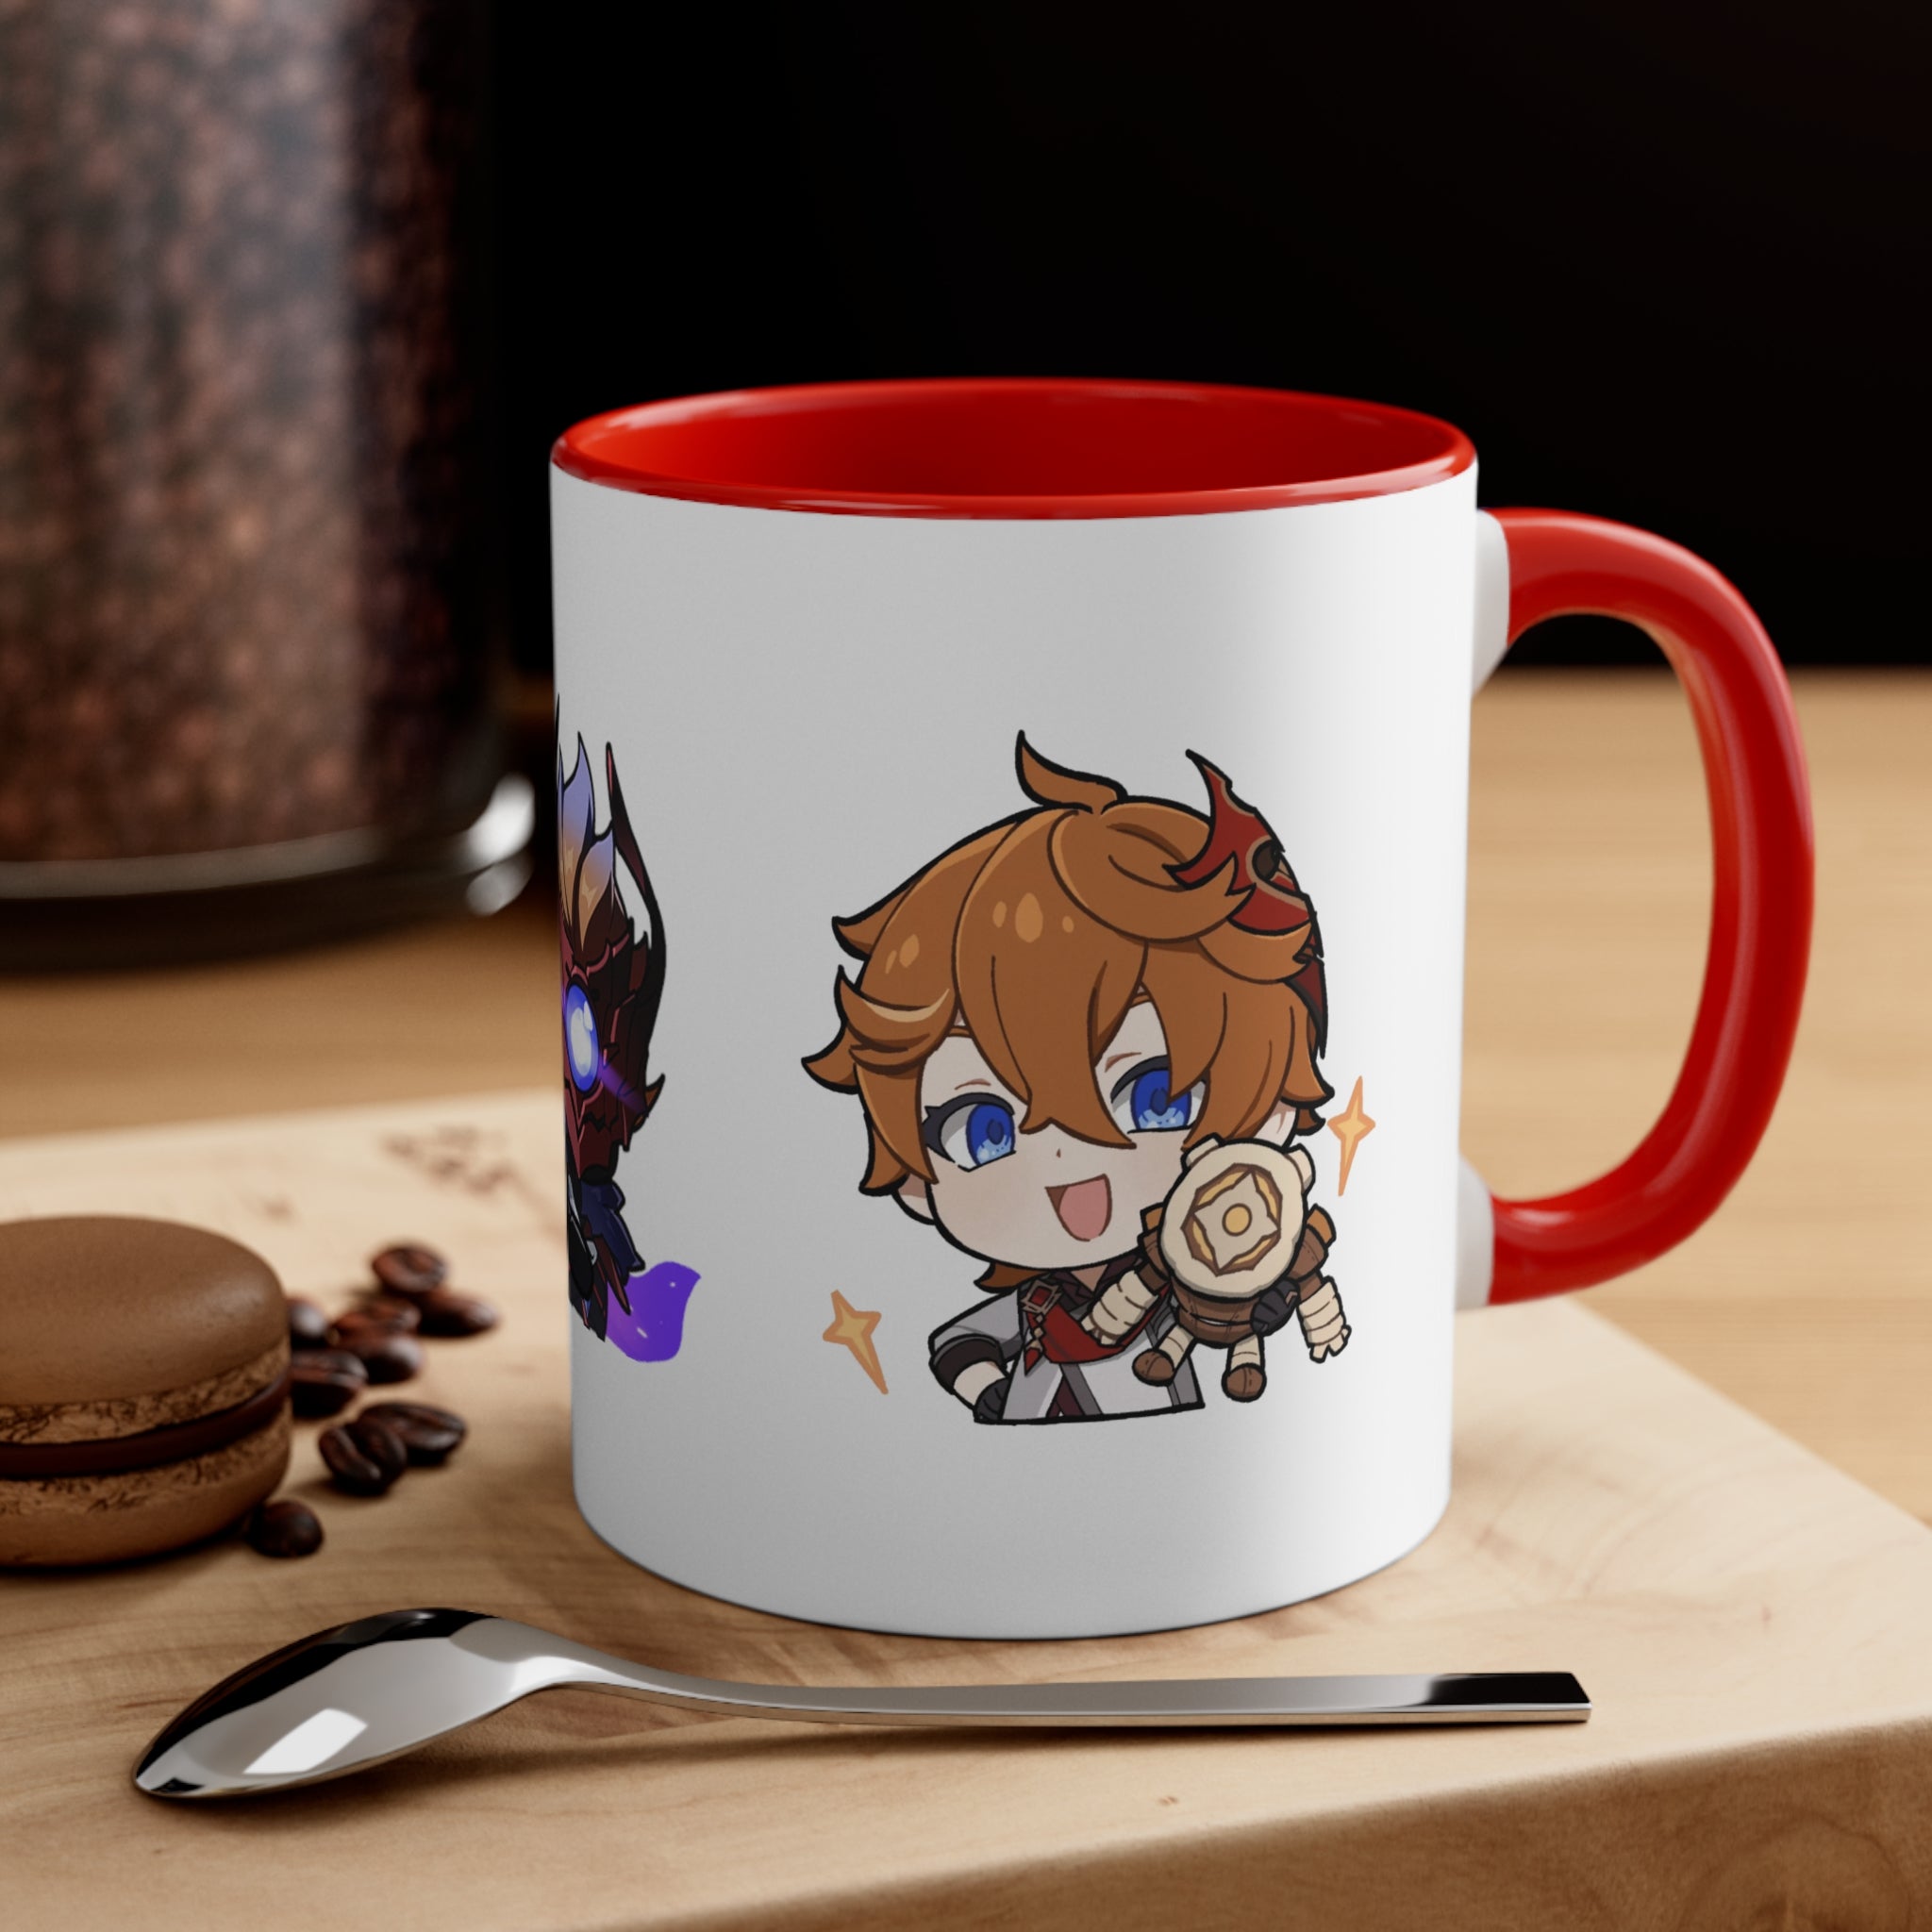 Childe Genshin Impact Accent Coffee Mug, 11oz Cups Mugs Cup Gift For Gamer Gifts Game Anime Fanart Fan Birthday Valentine's Christmas